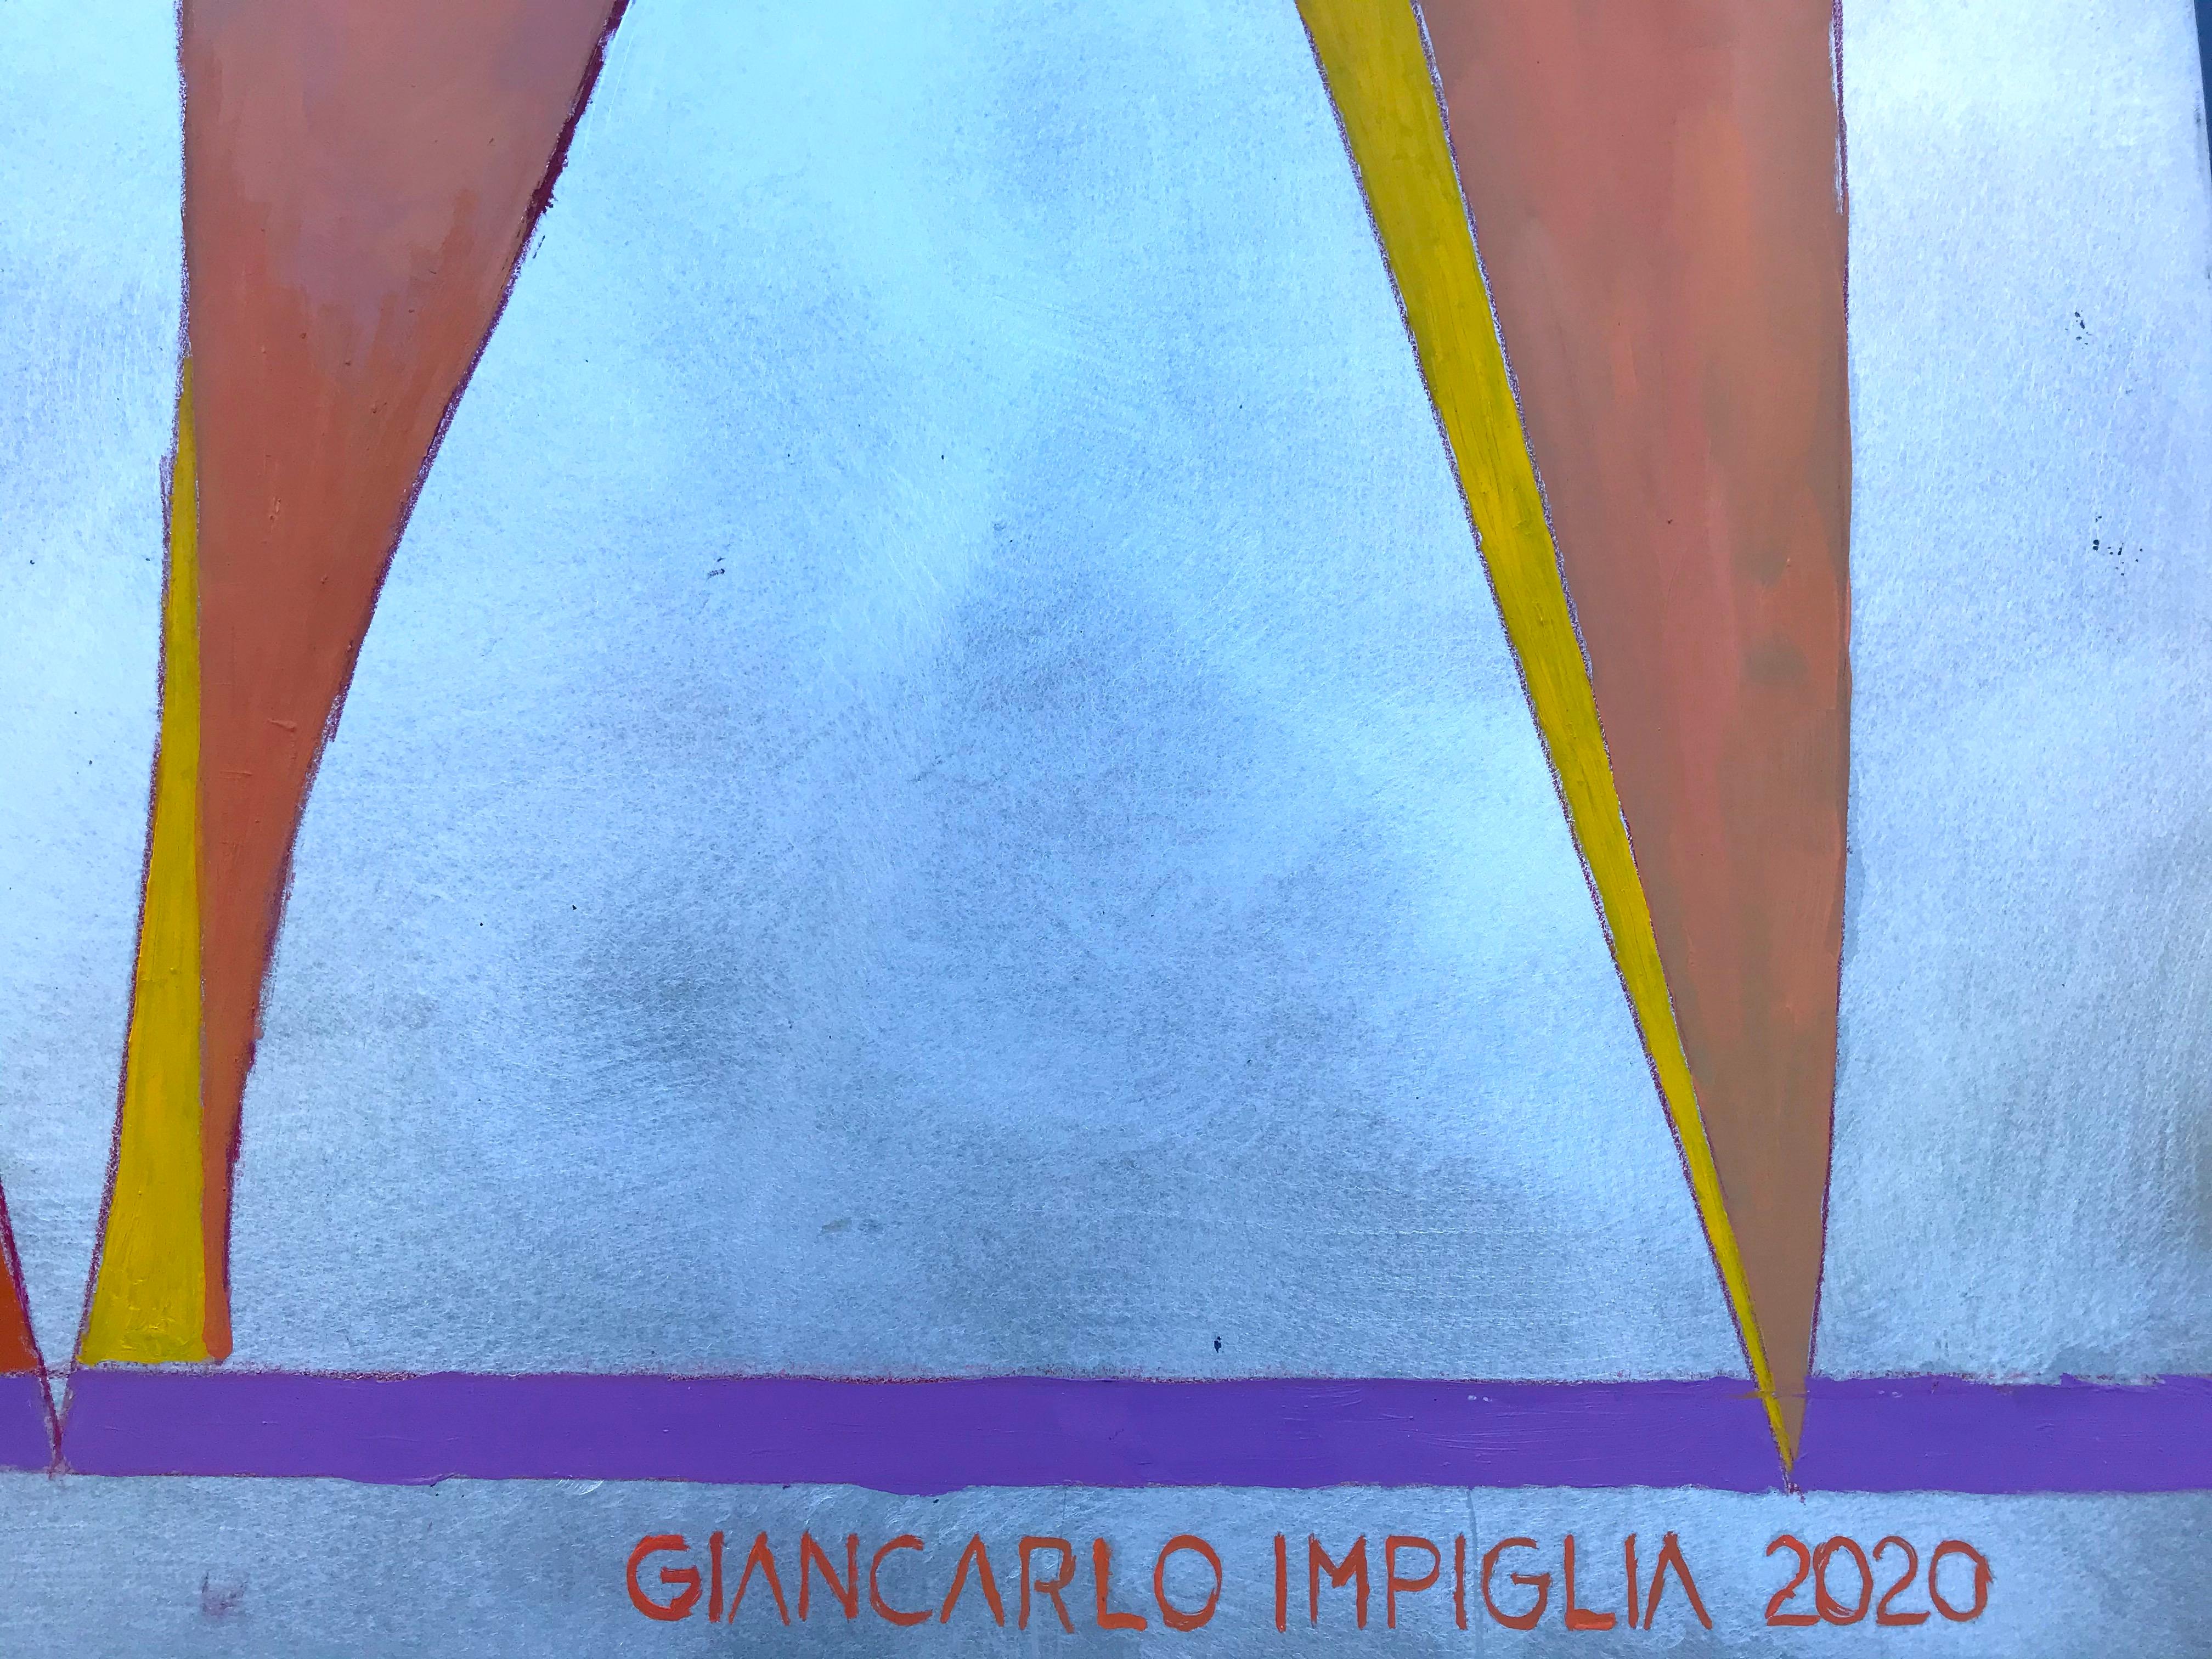 A magnificent new oil painting by the great Giancarlo Impiglia that harnesses the rough, reflective quality of aluminum for an entirely unique aesthetic. 

Born in Rome, Impiglia moved to New York in the 70s, where he established a signature style